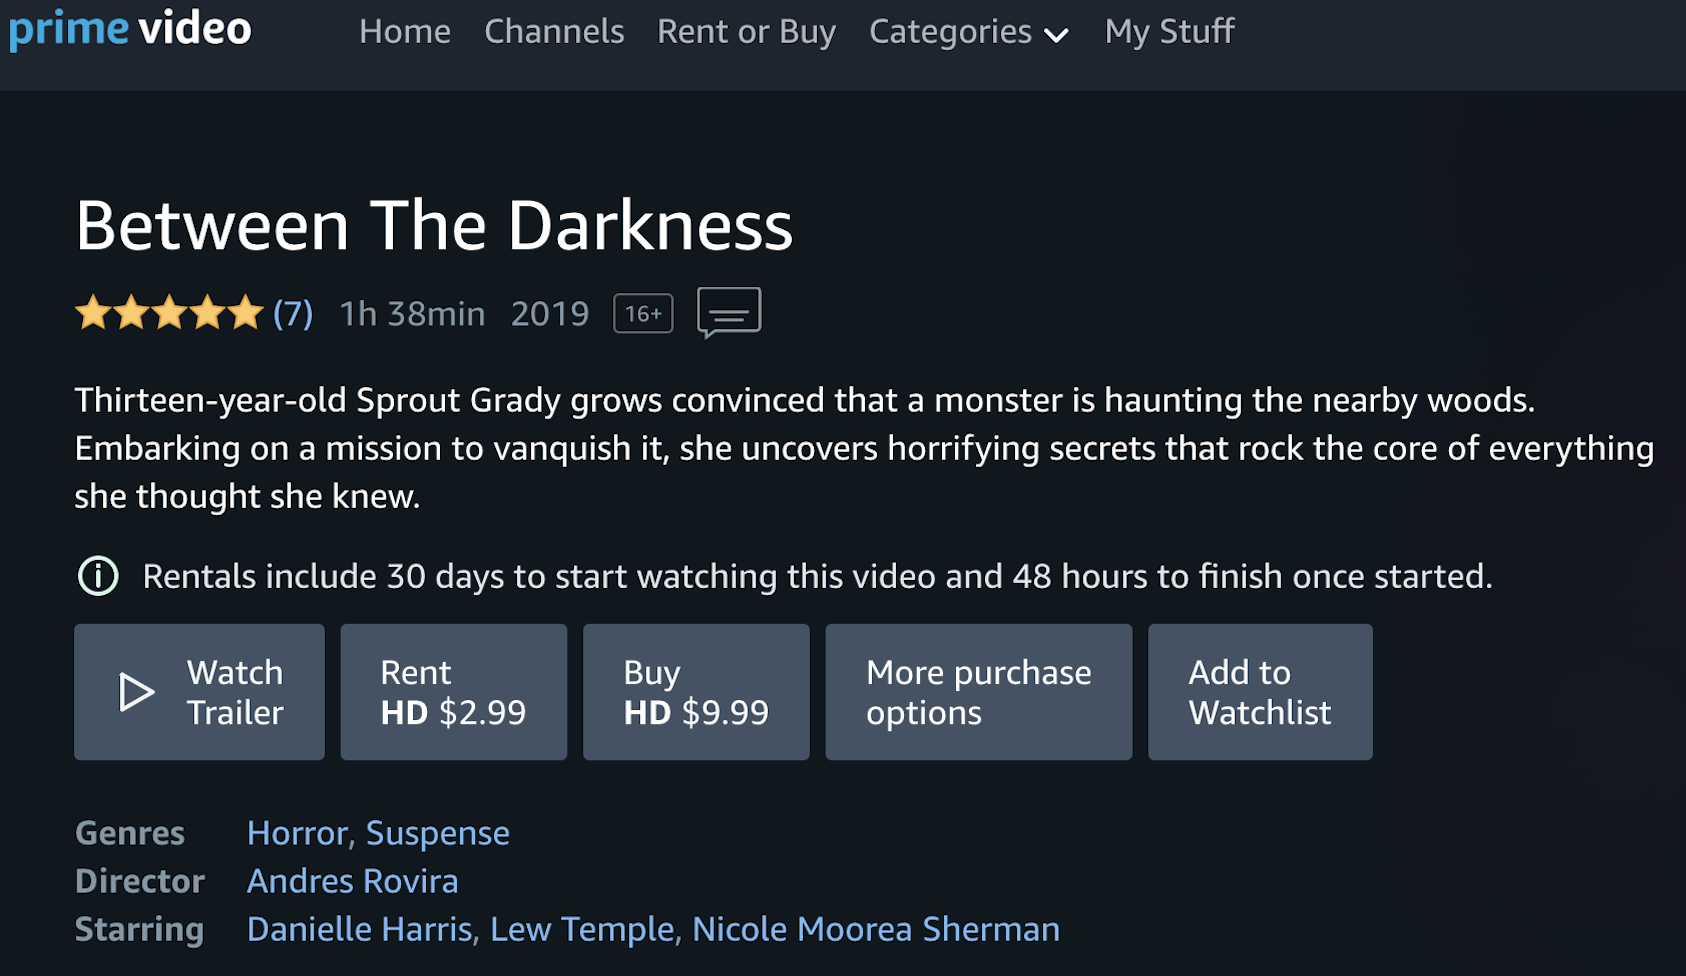 Miller/Datri Entertainment’s feature film “Between The Darkness” released on Amazon and other major streaming platforms